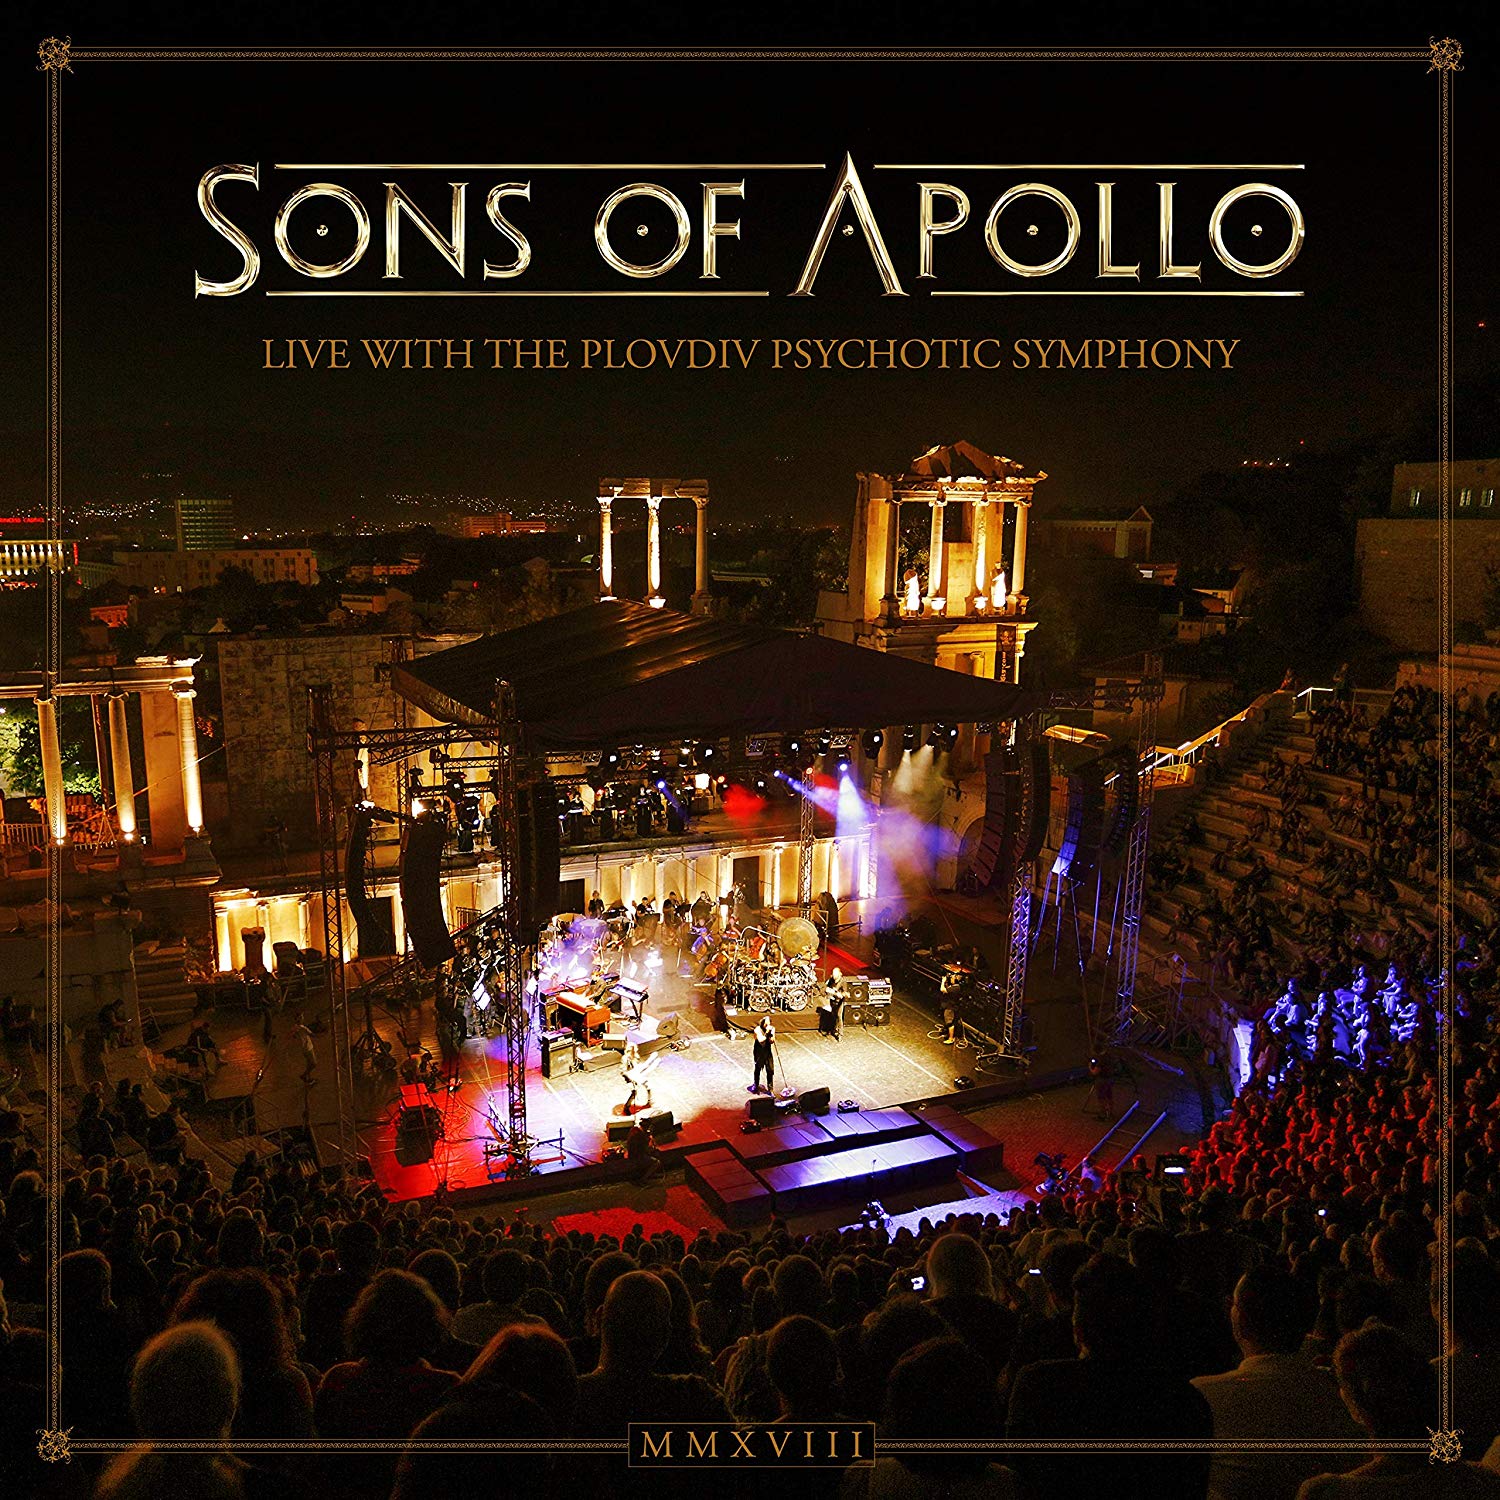 Live with the plovdiv psychotic symphony | Sons of Apollo